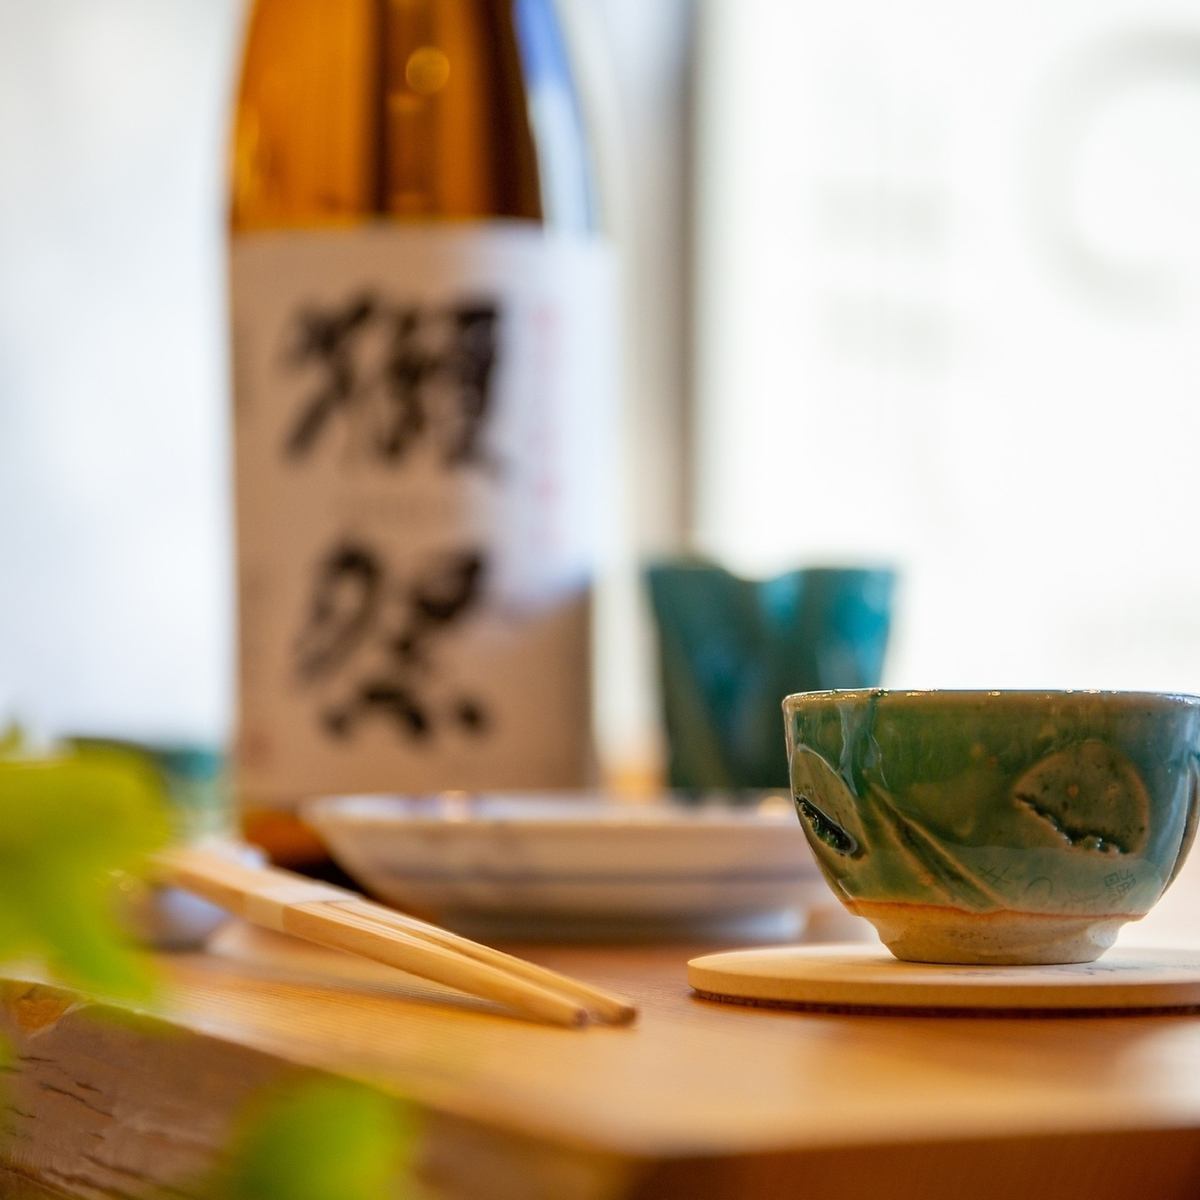 A famous restaurant where you can enjoy sushi and sake